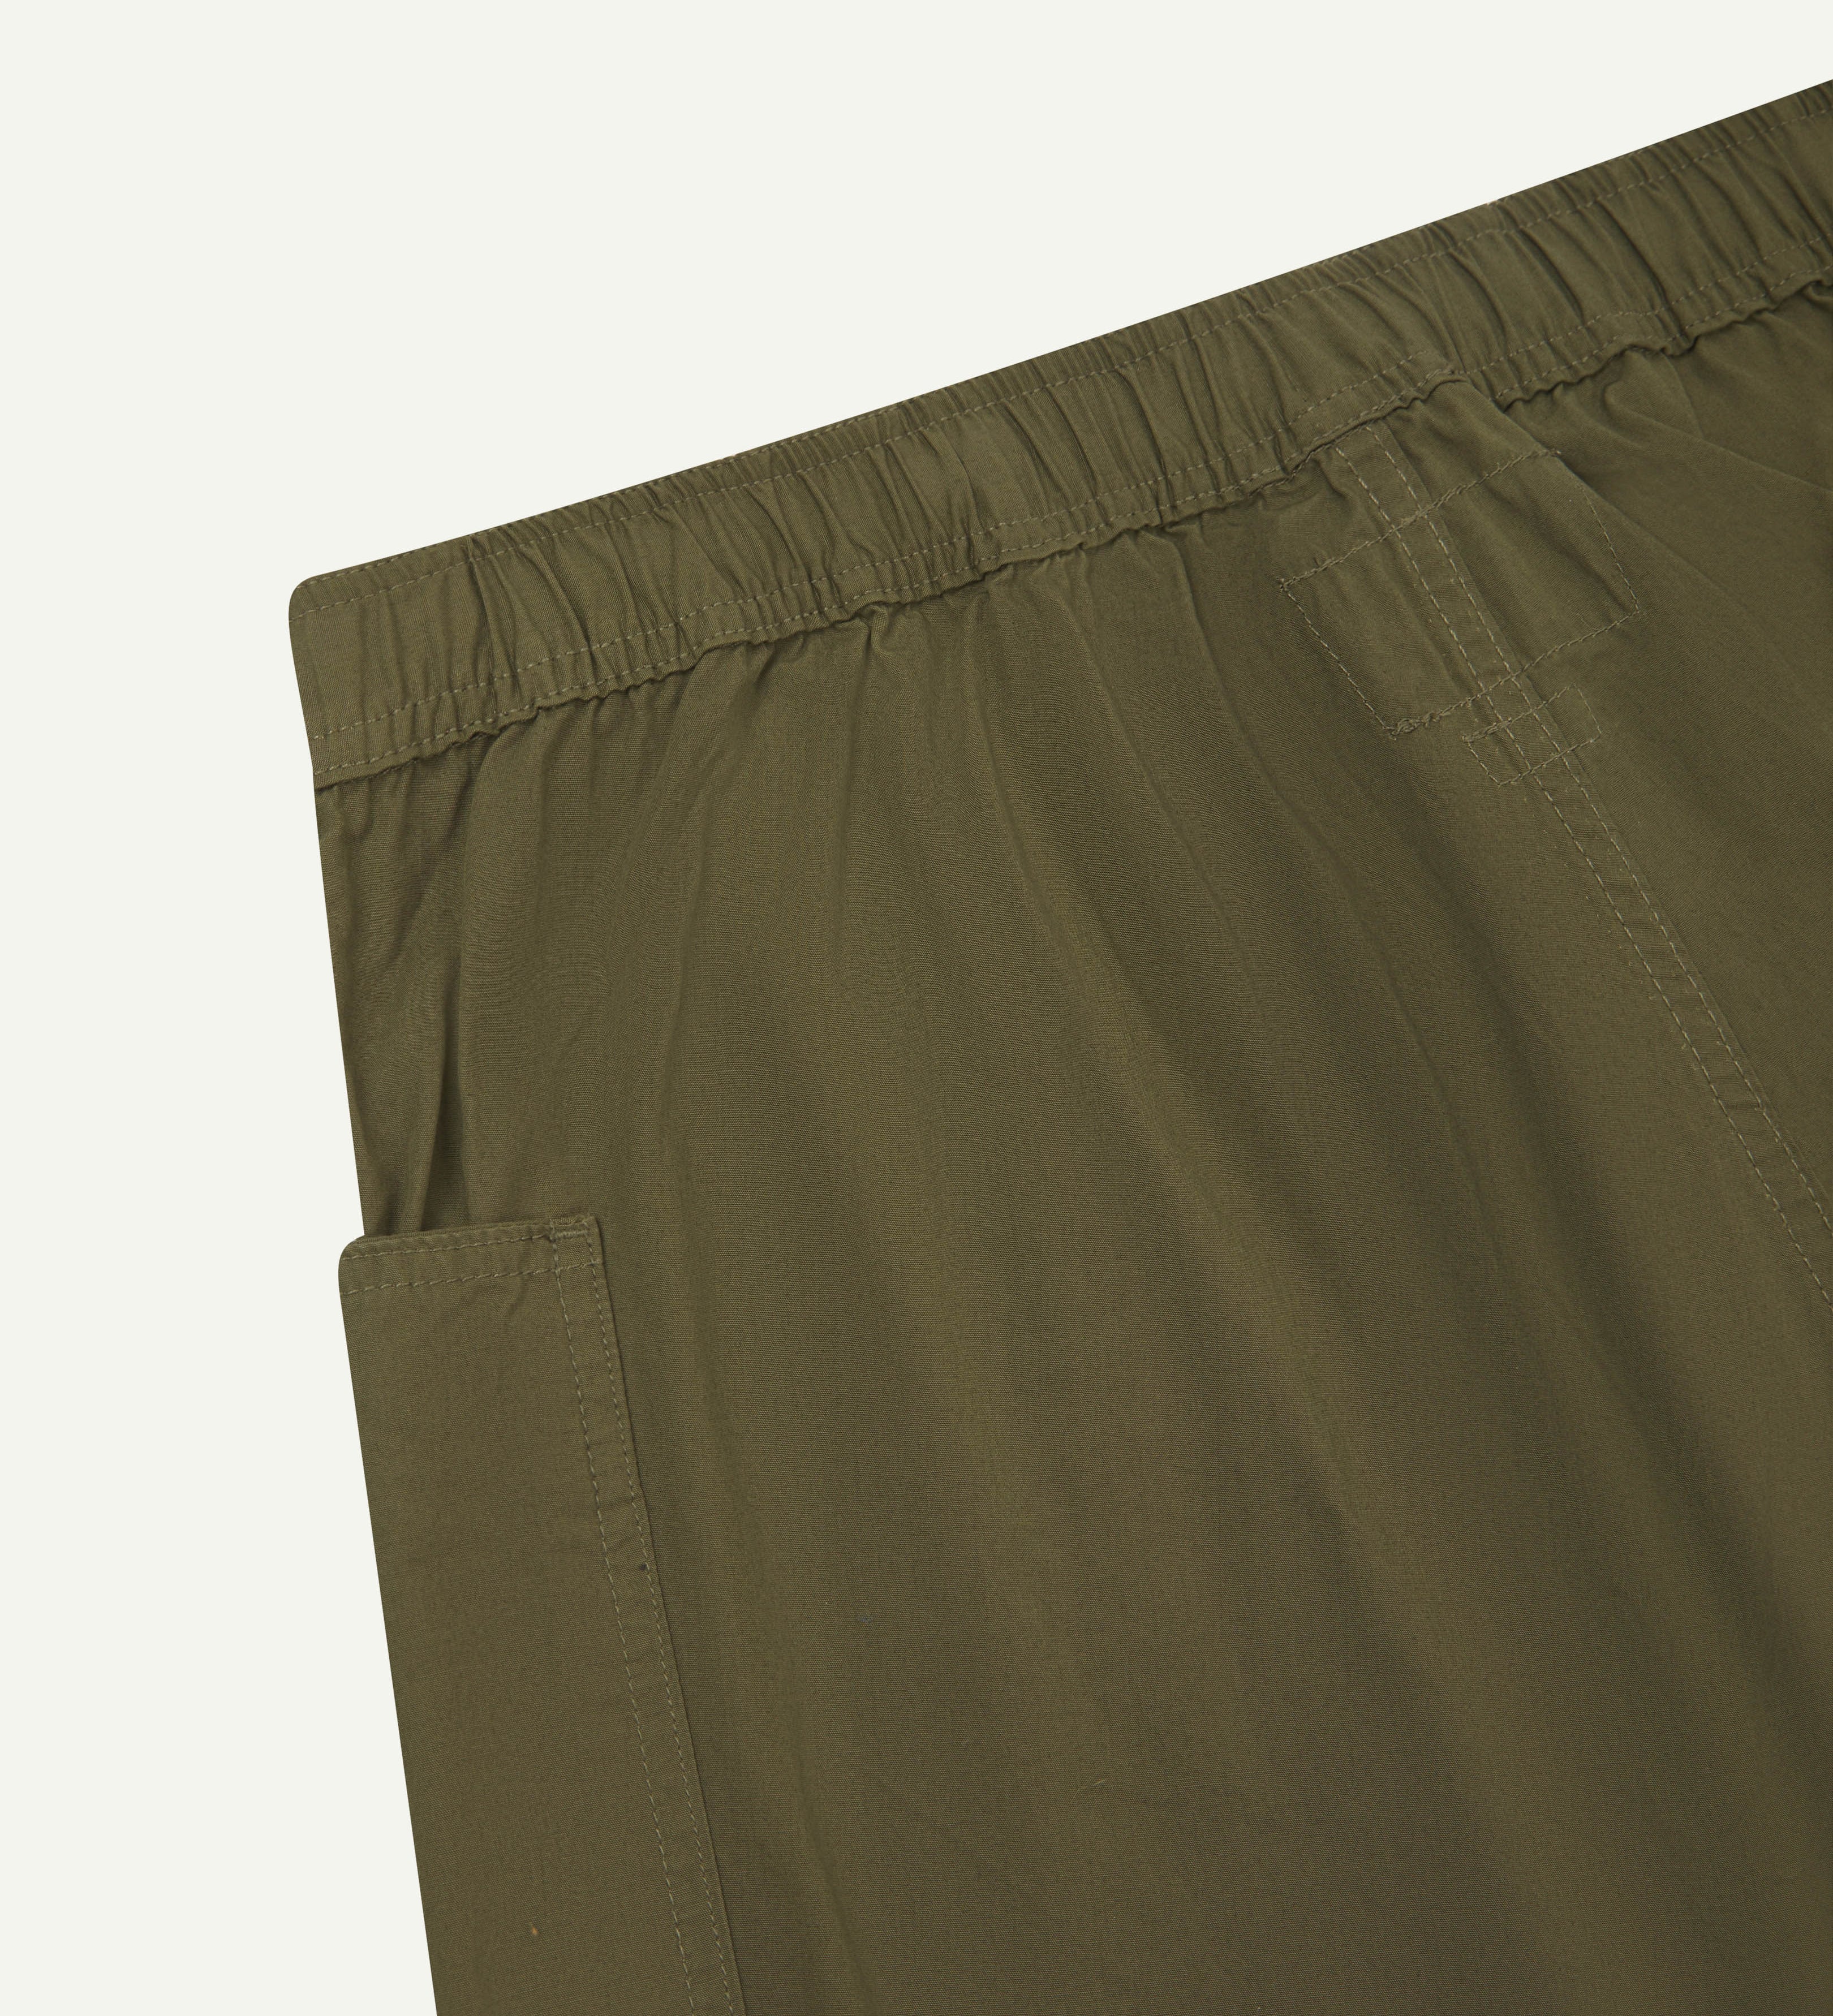 Close-up of the back of the lightweight organic olive green cotton pants showing the elasticated waist.